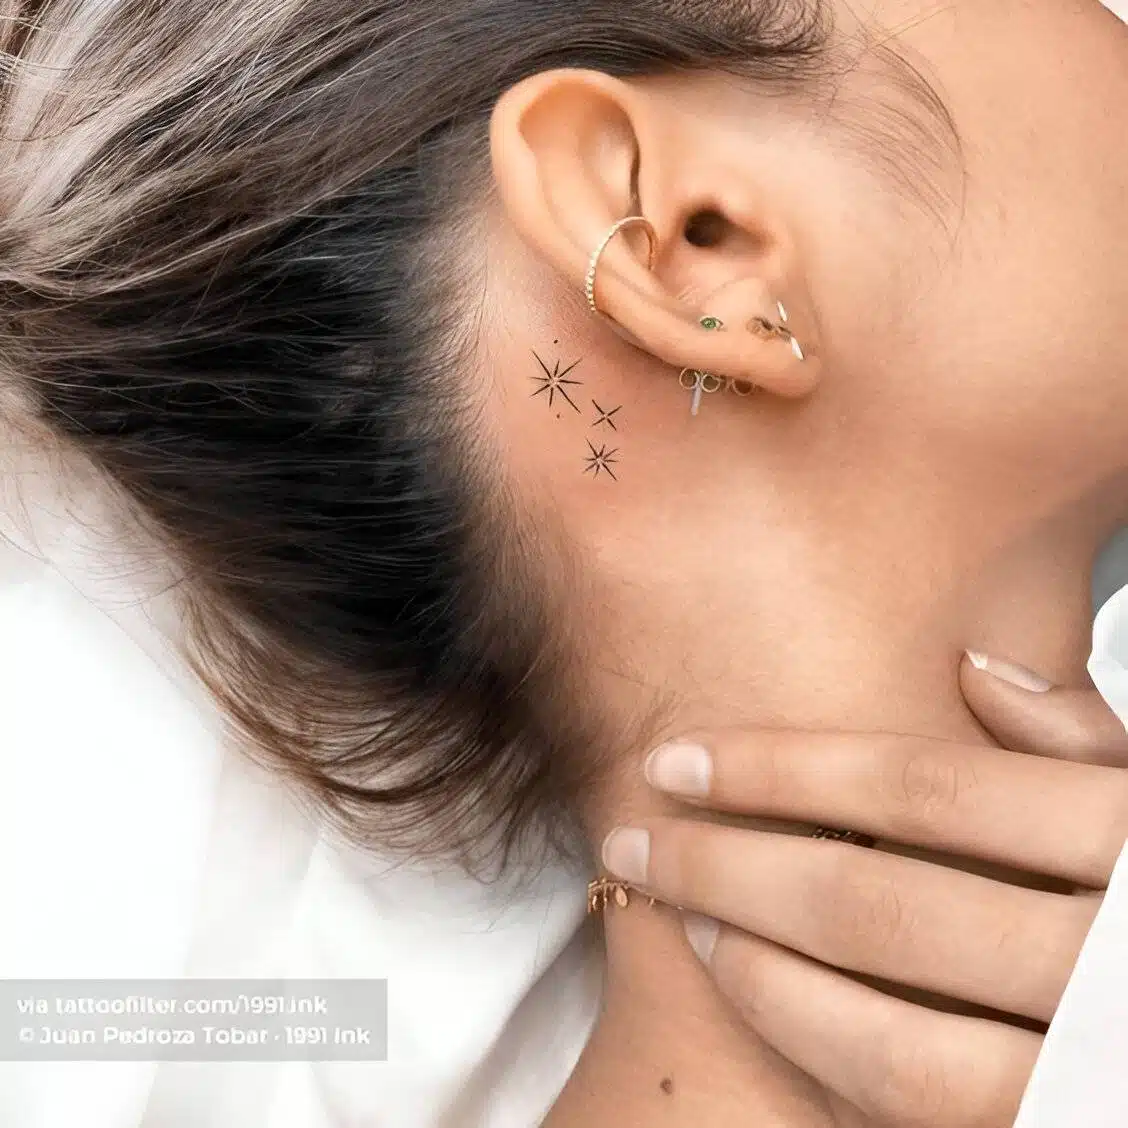 25 Low-key Stunning Behind The Ear Tattoos To Get ASAP - 195